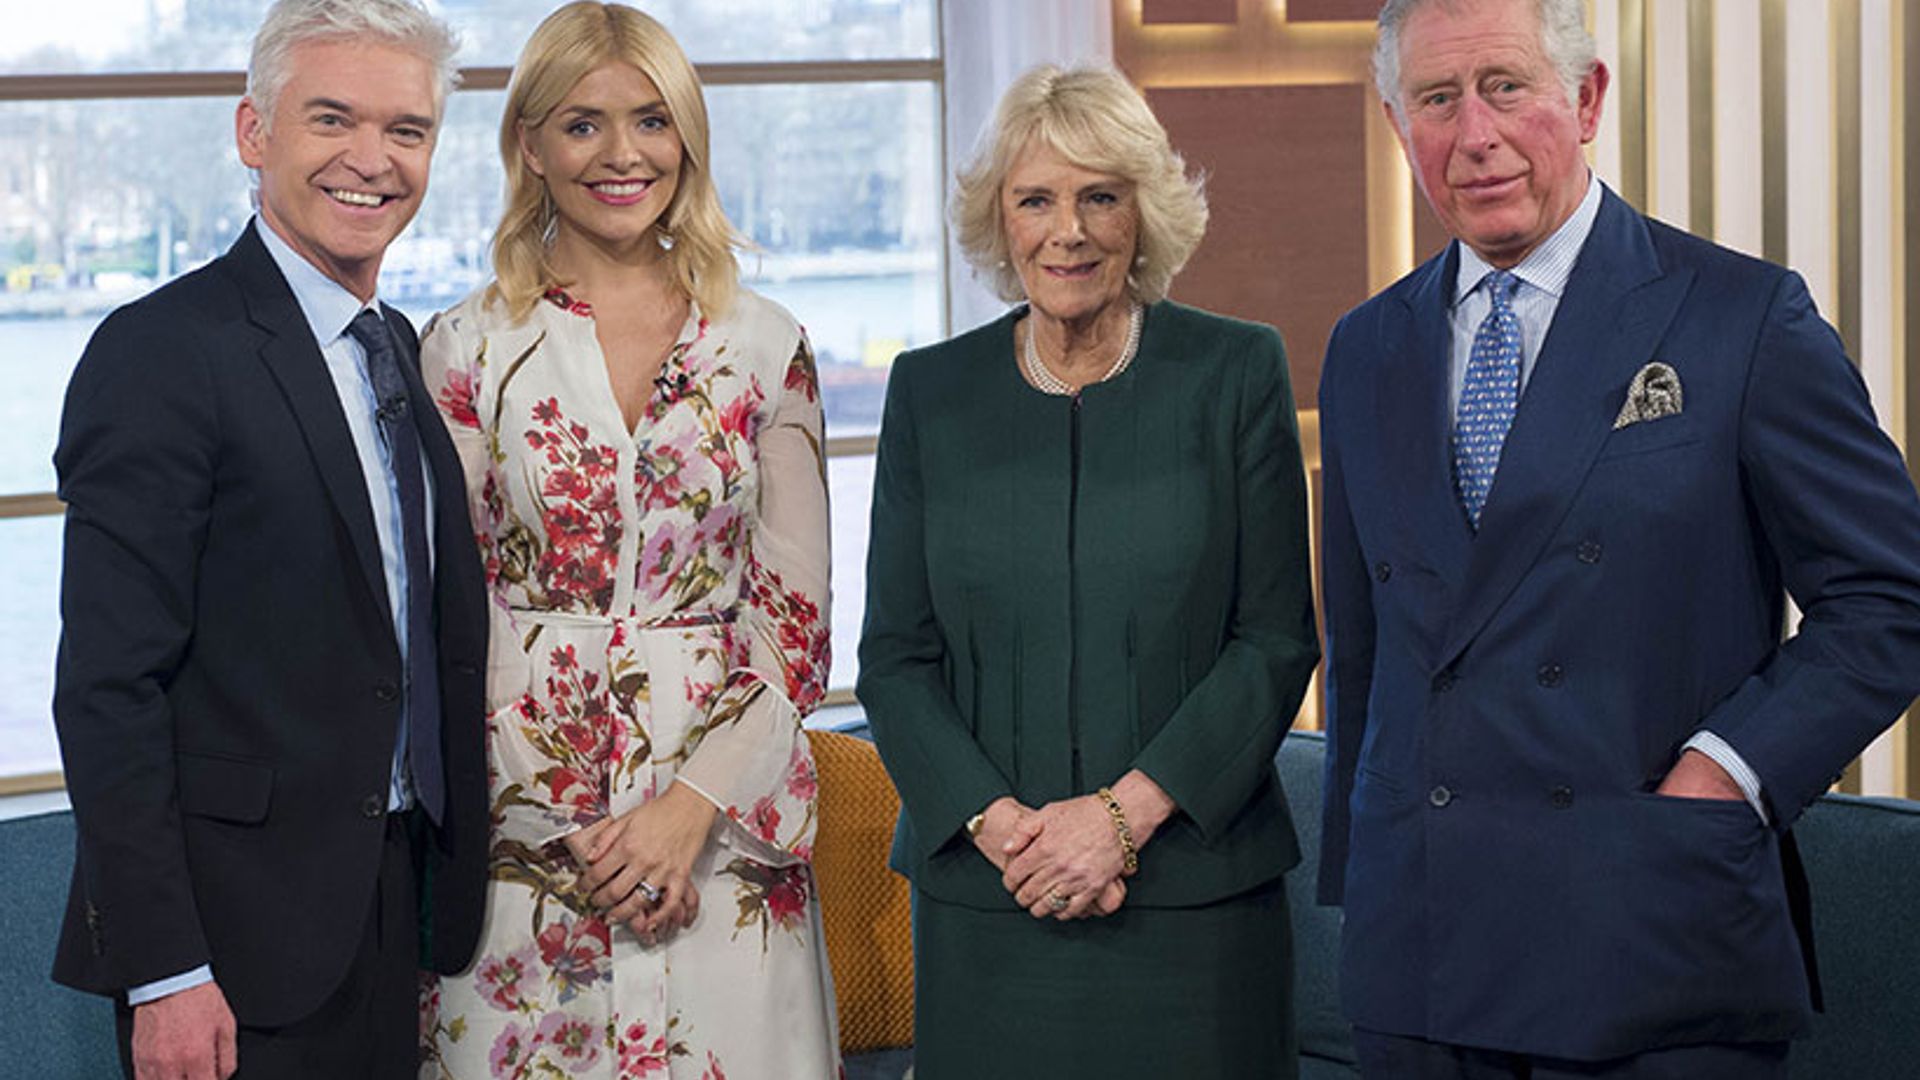 Holly Willoughby visits Prince Charles’ home for some Christmas shopping